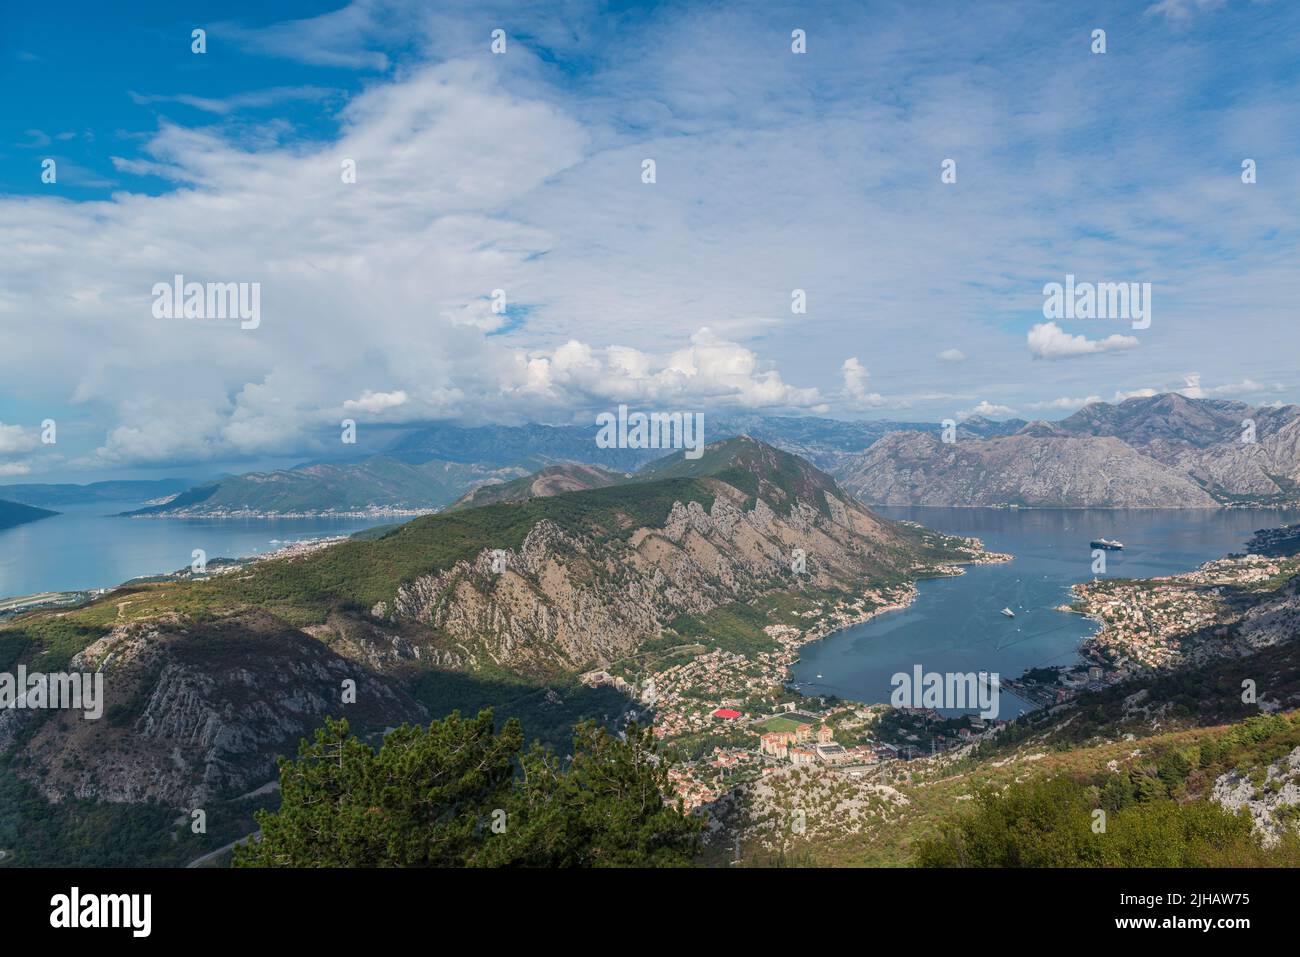 Panoramic view  of the Bay of Kotor, seen from the observation platform. Montenegro. Stock Photo